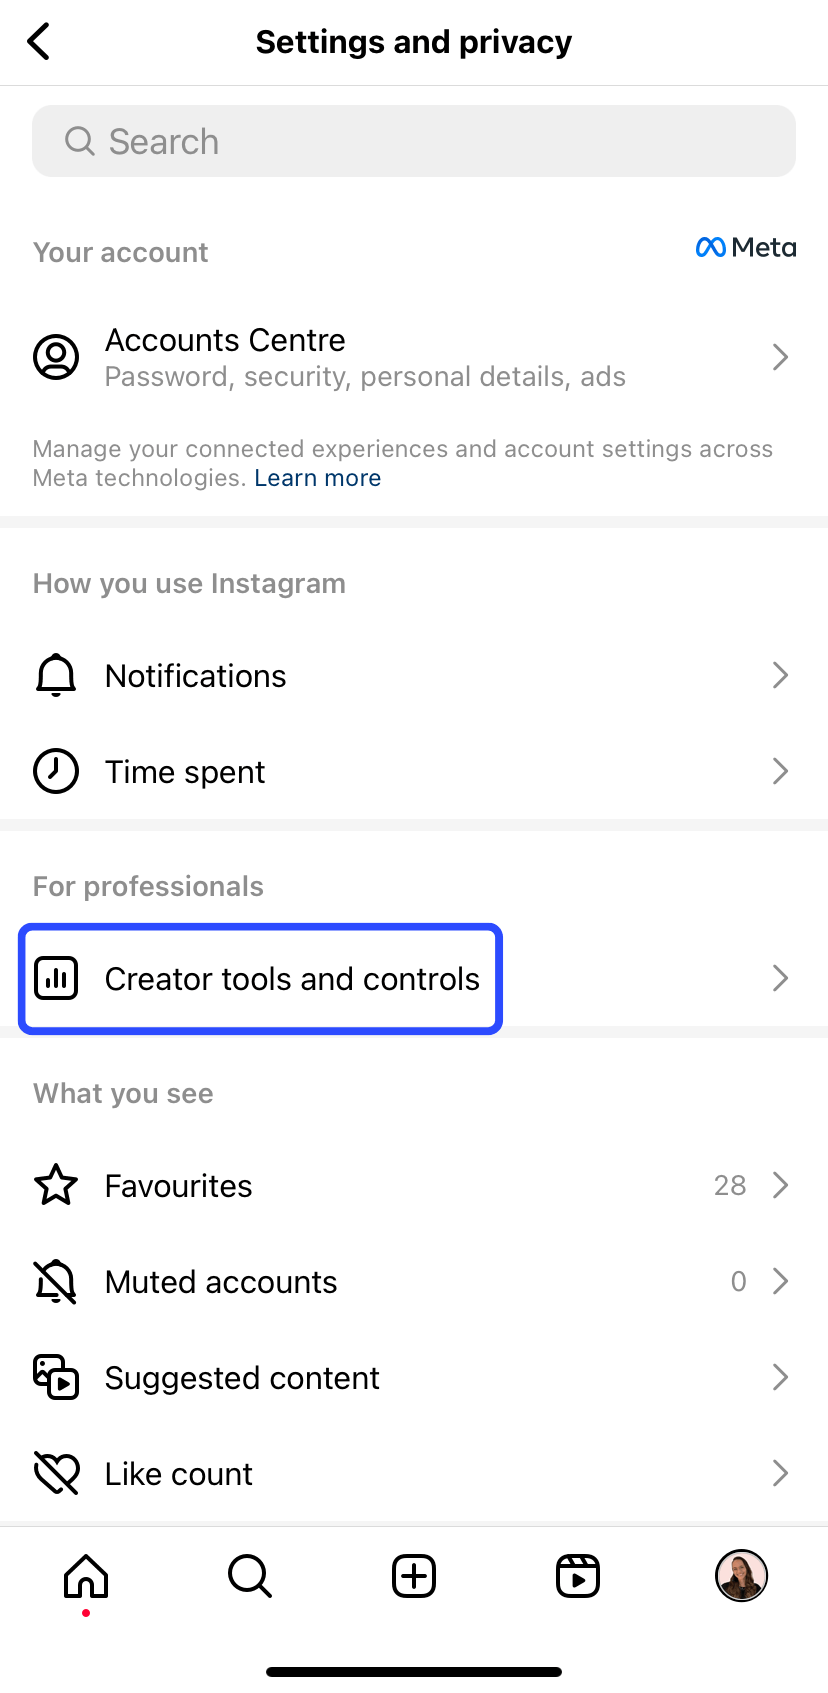 How to Get Verified on Instagram in 5 Simple Steps (2022 Edition)